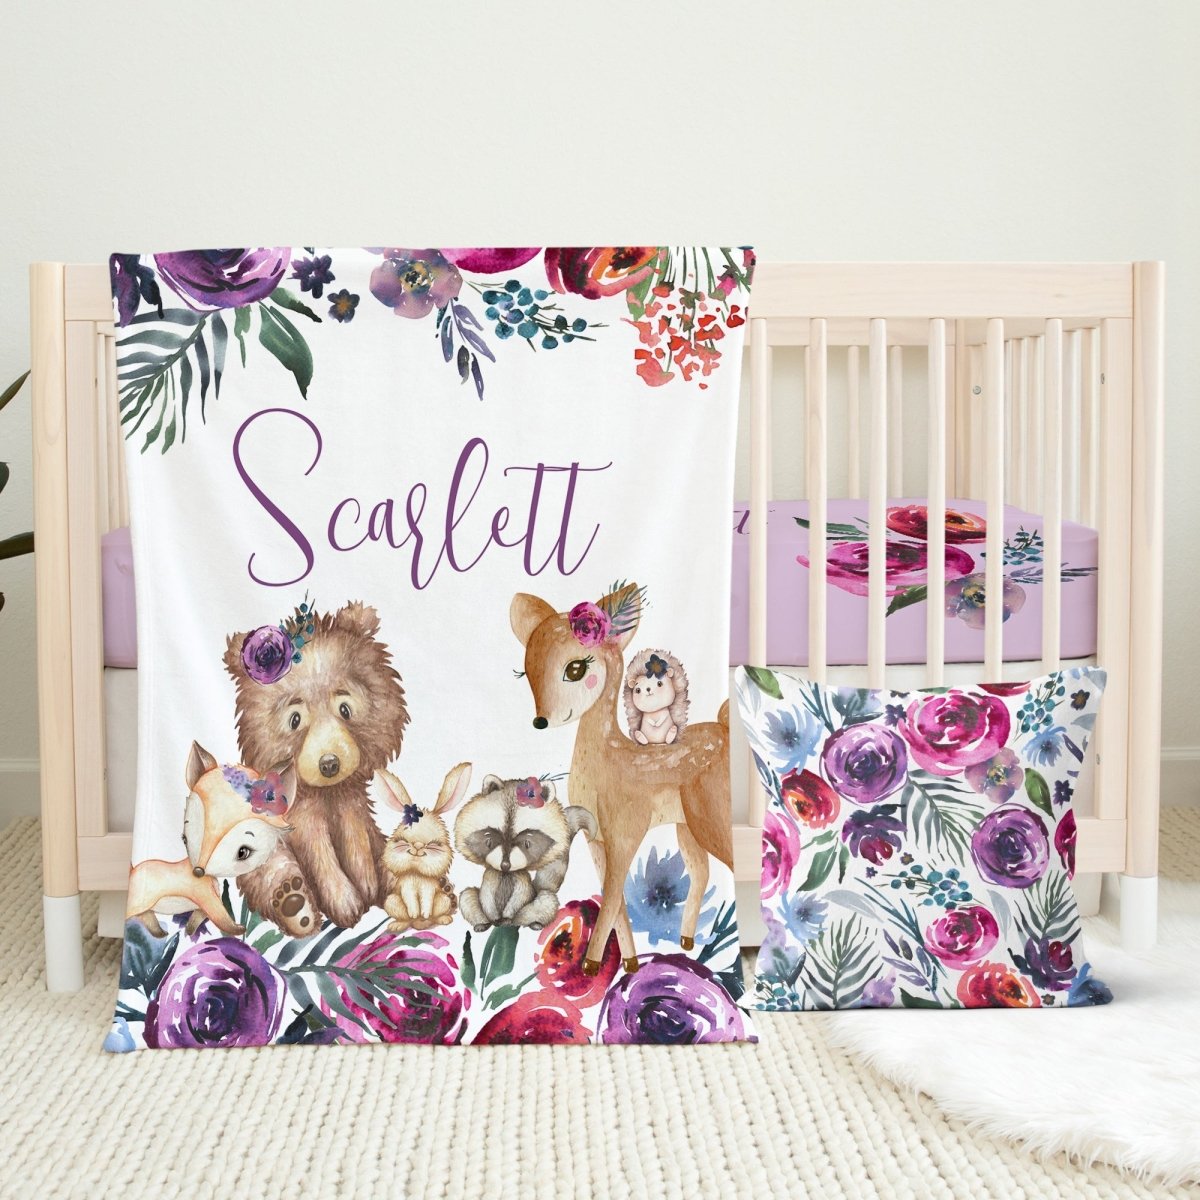 Sweet Woodlands Personalized Crib Sheet - gender_girl, Personalized_Yes, text